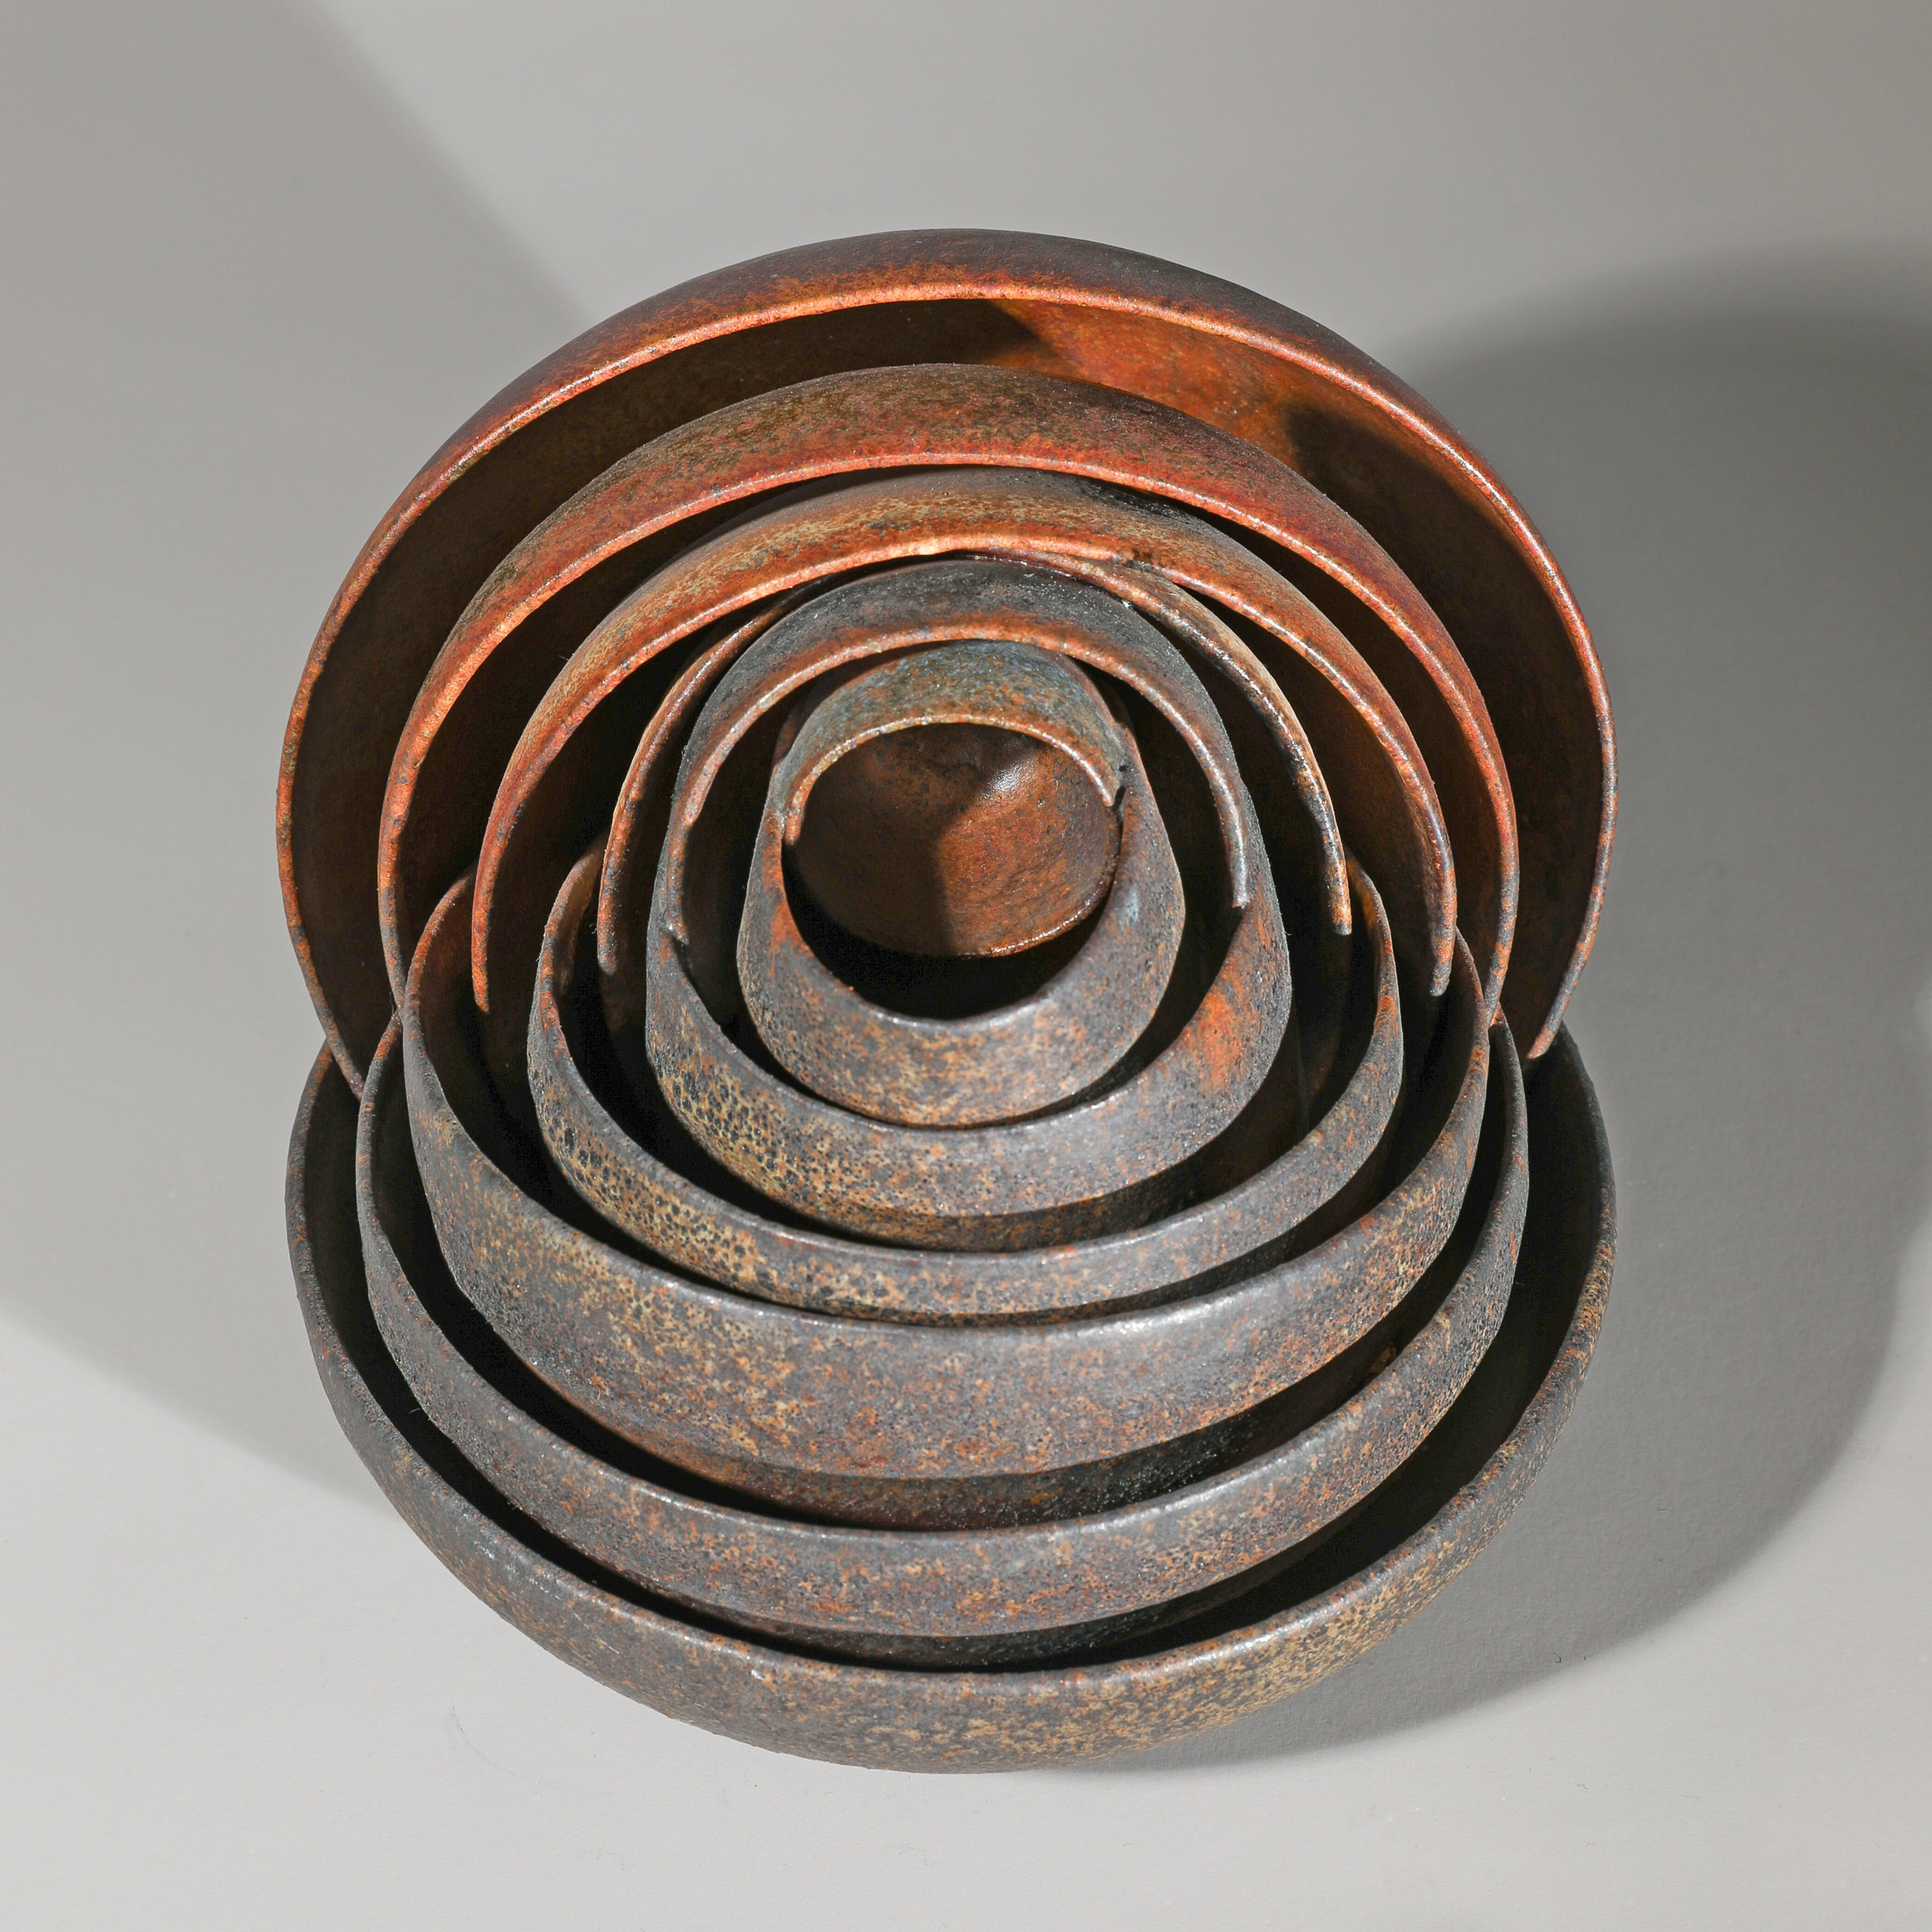 Beate Kuhn*, shell sculpture, 1980 - Image 2 of 6